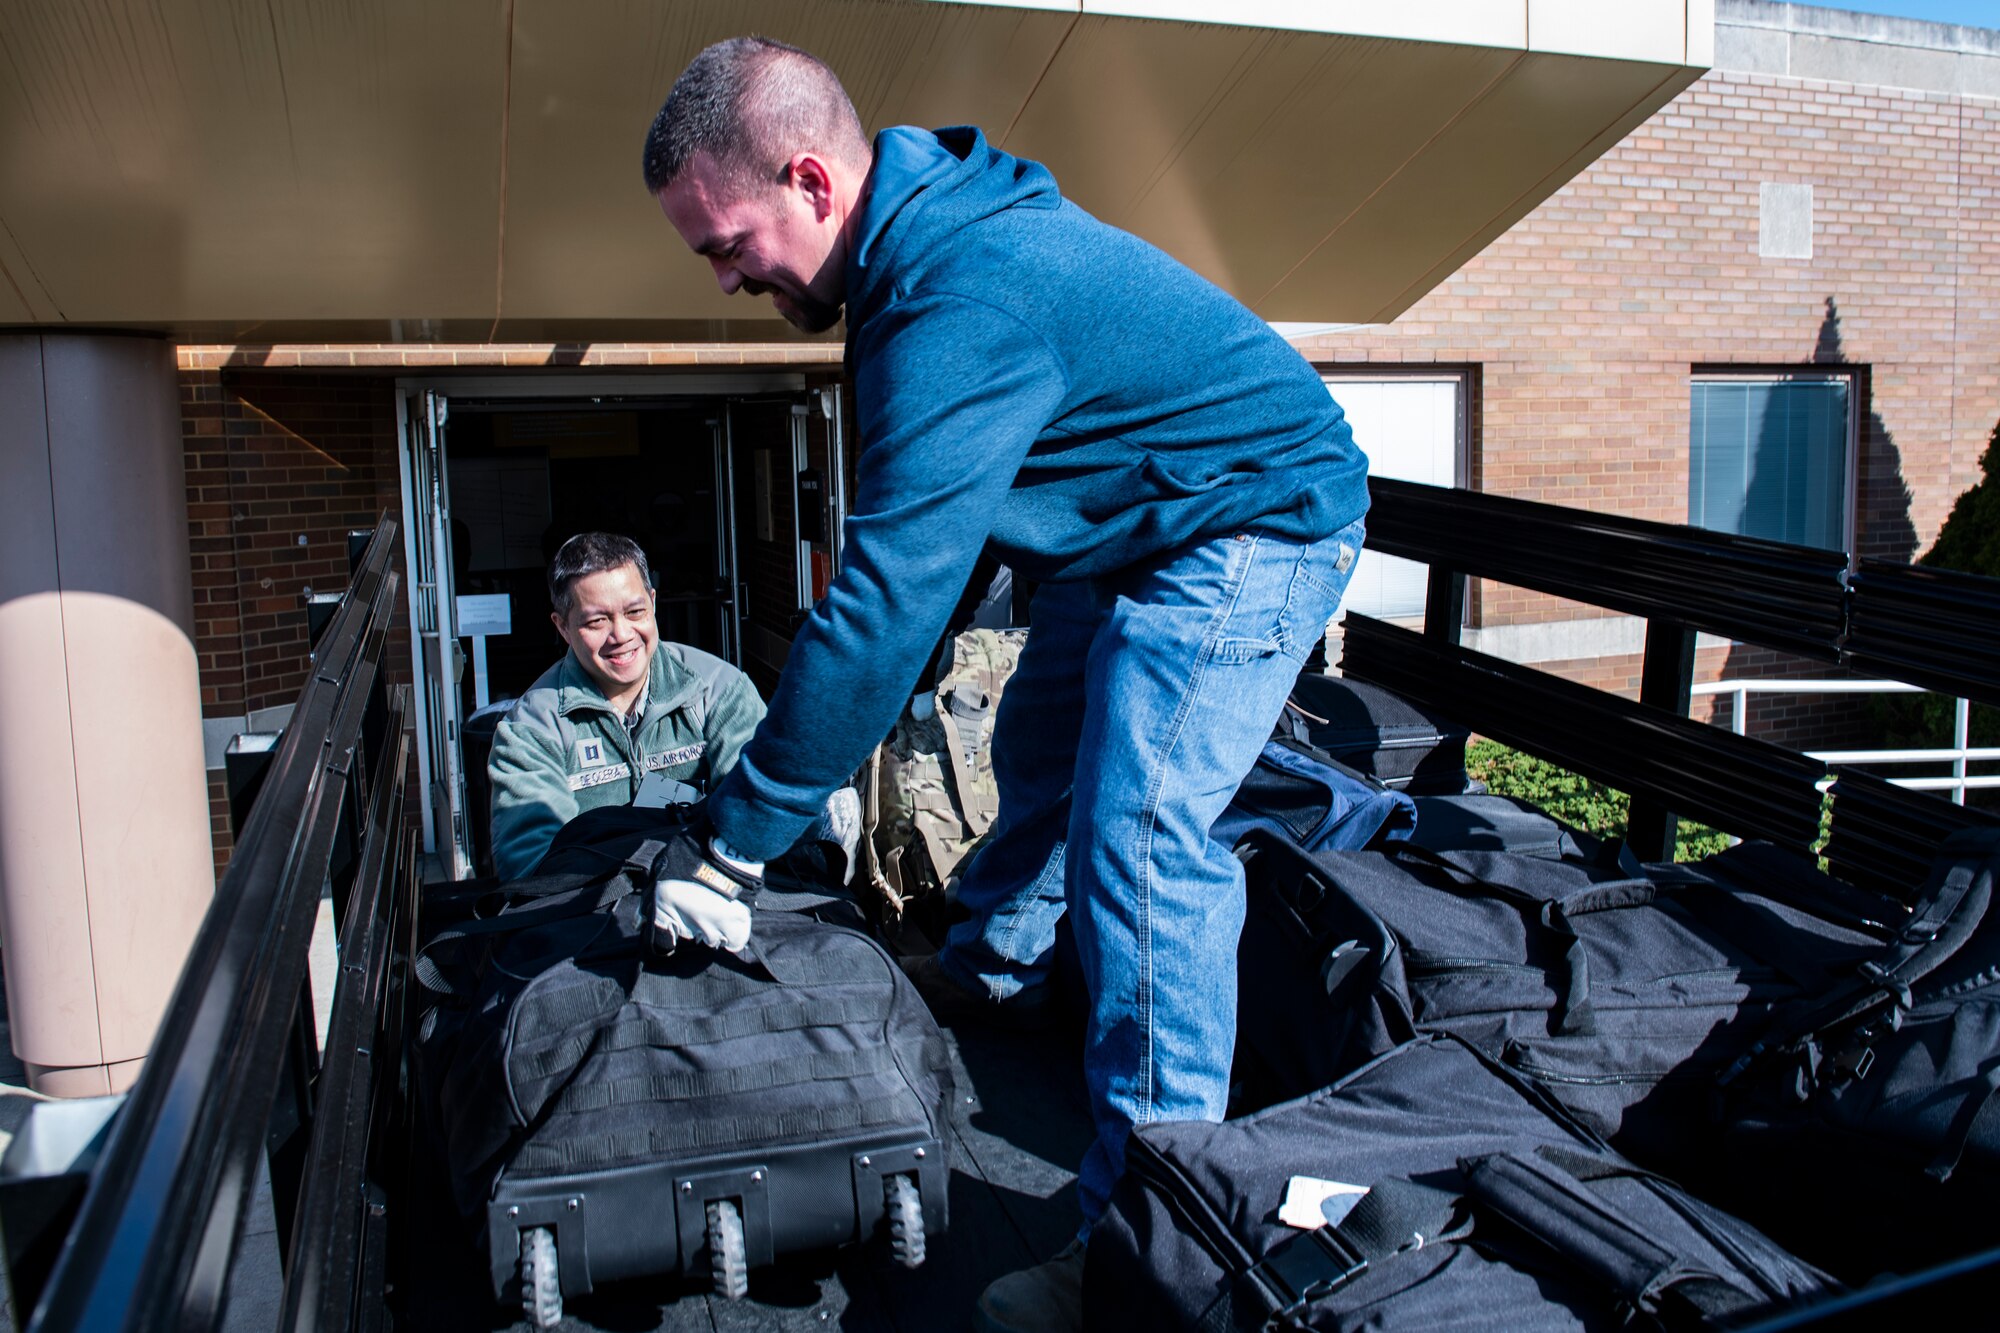 Capt. Tyro De Ocera, 911th Aeromedical Staging Squadron nurse, loads his luggage onto the back of a truck during the mobilization process at the Pittsburgh International Airport Air Reserve Station, Pennsylvania, April 5, 2020.